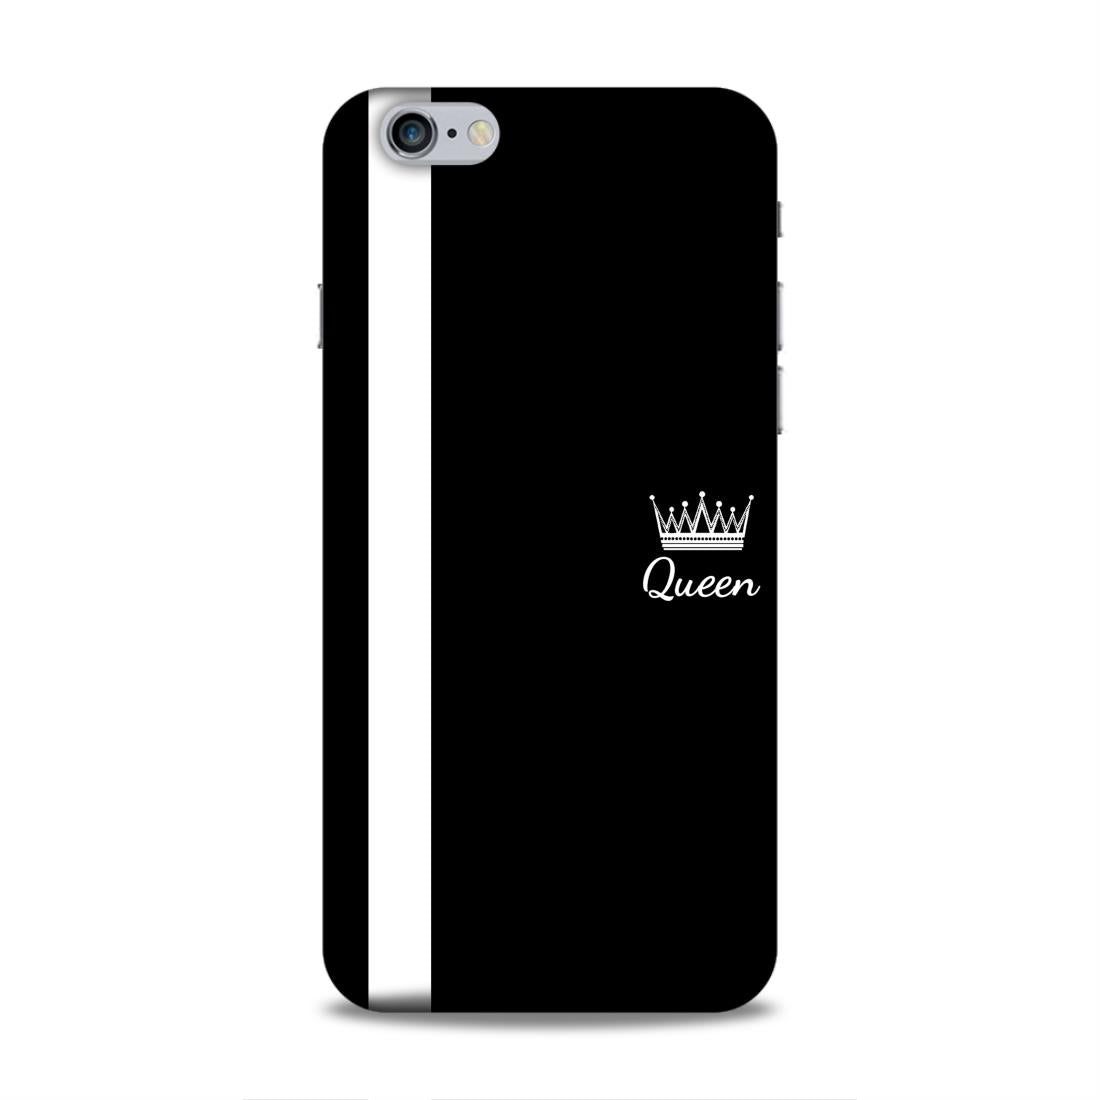 Queen Hard Back Case For Apple iPhone 6 Plus / 6s Plus